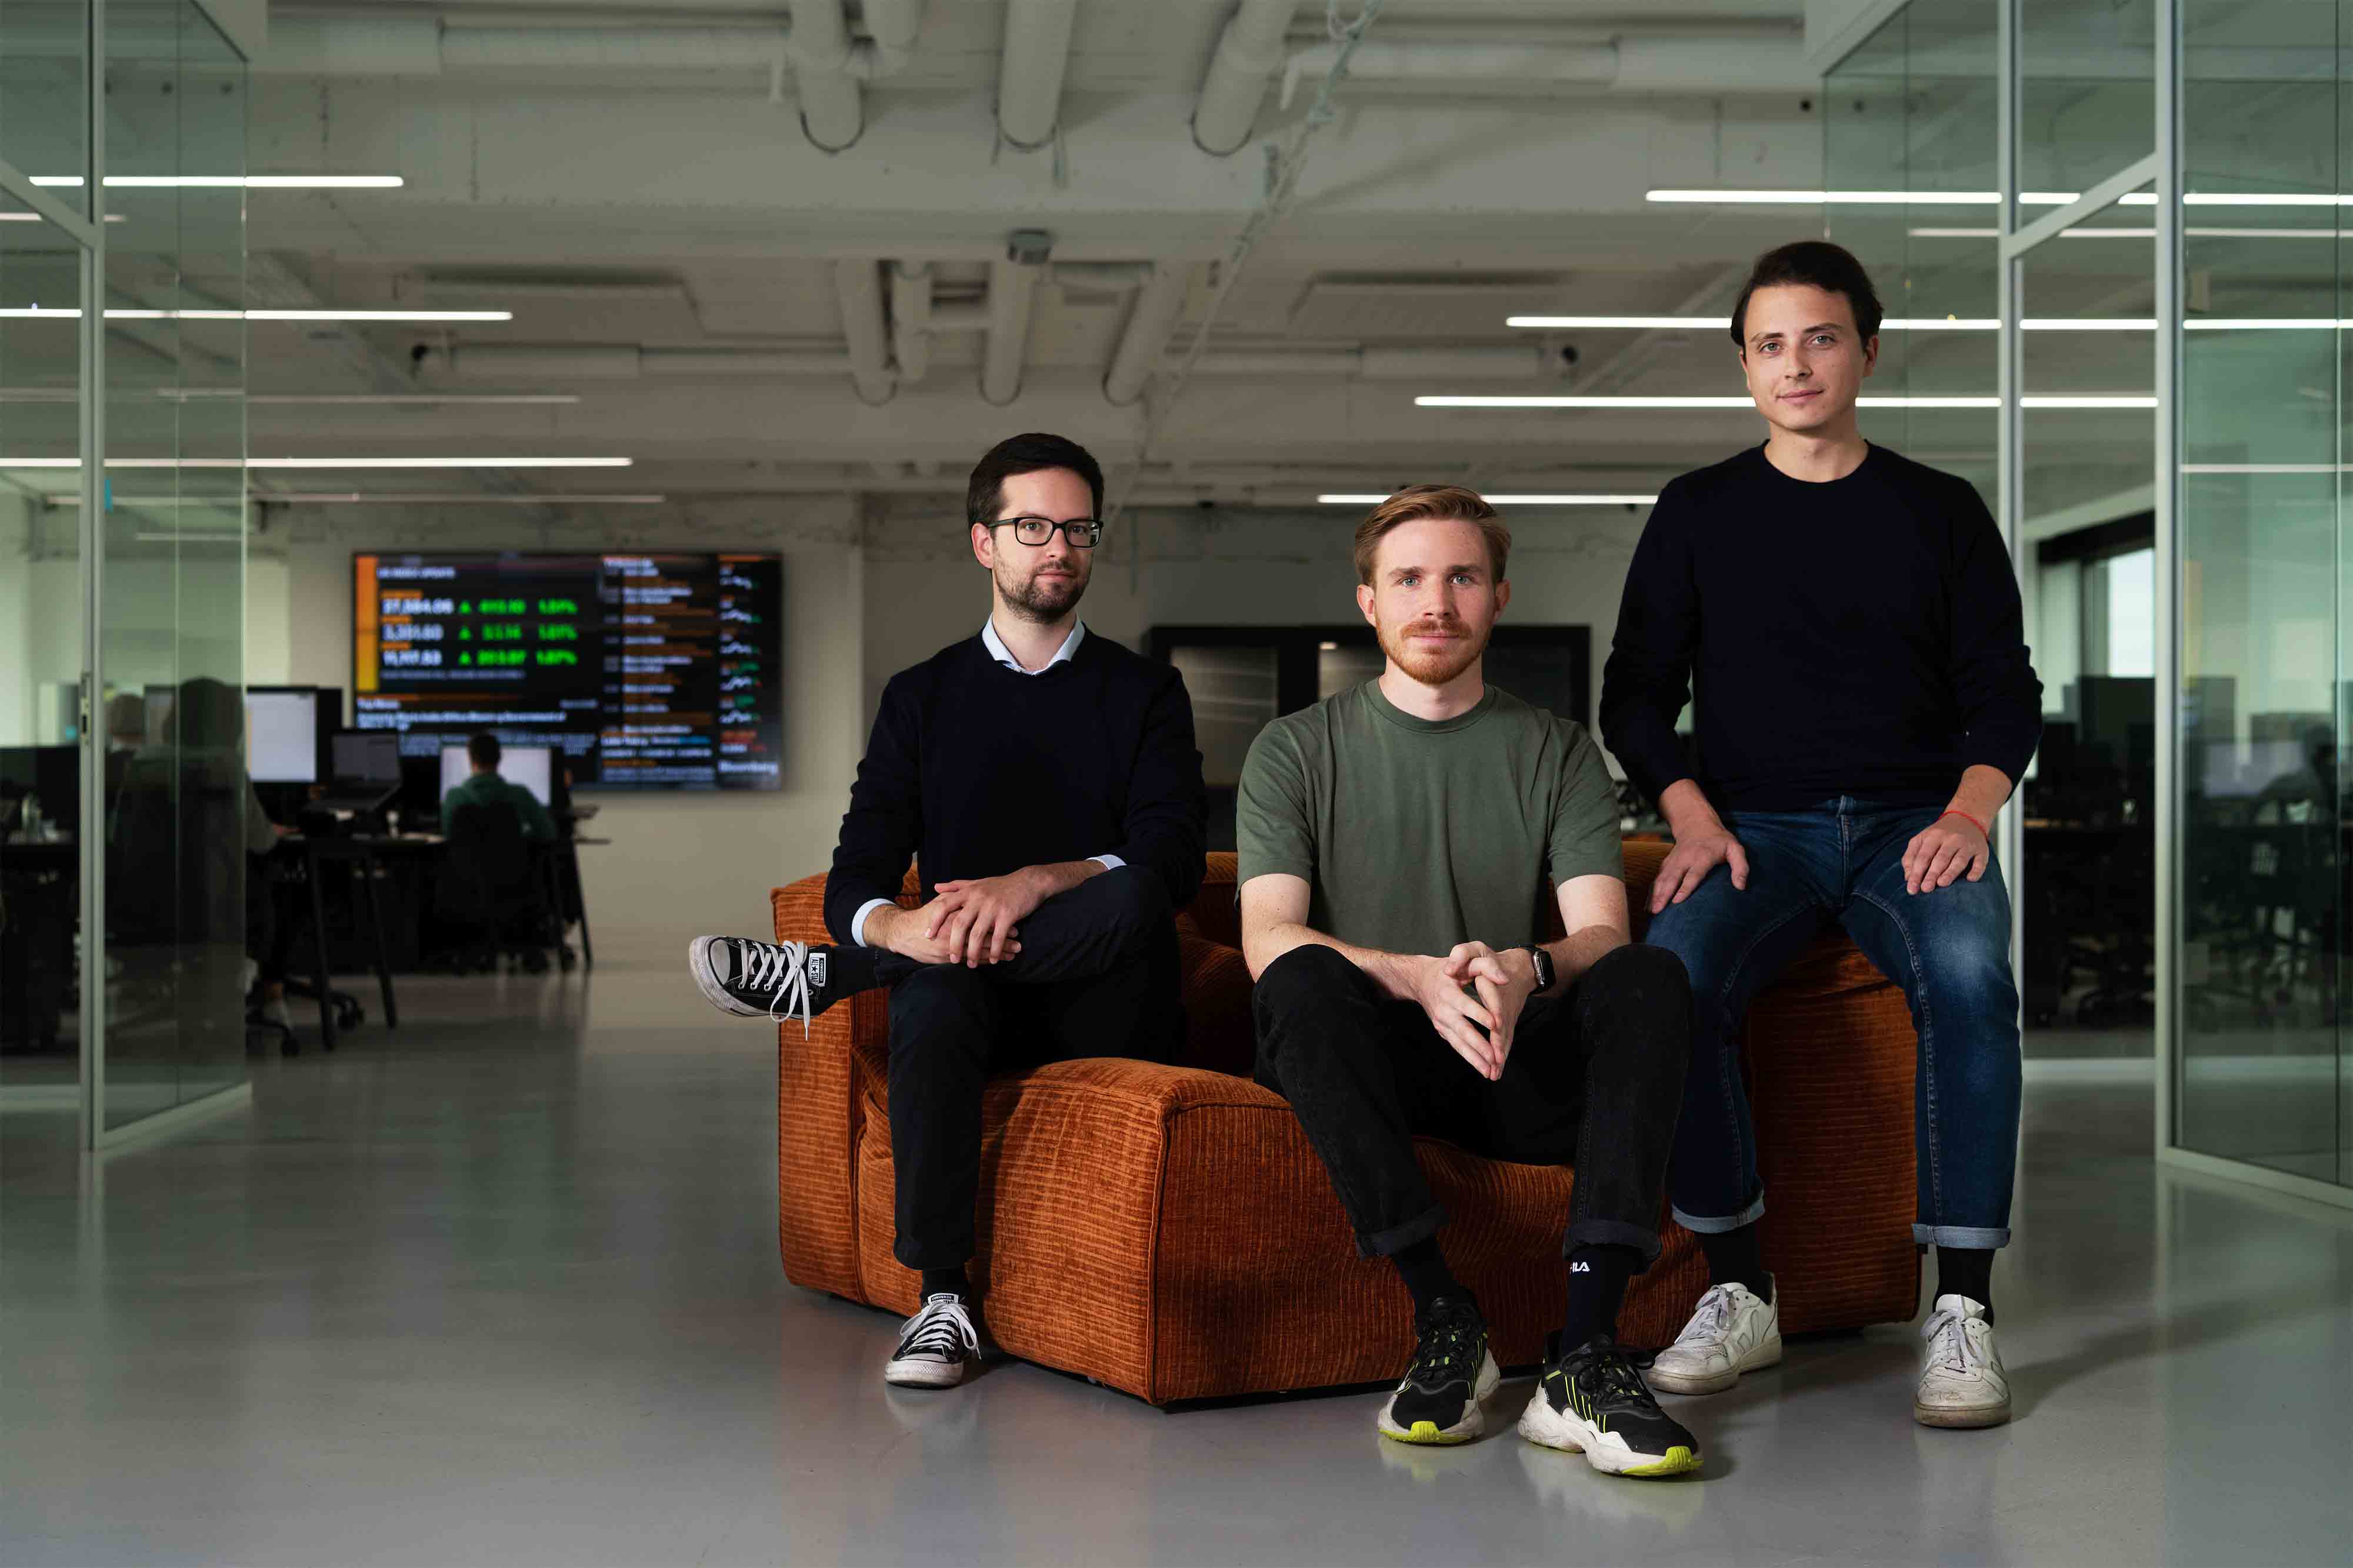 (L-R) Trade Republic co-founders Thomas Pischke, Marco Cancellieri and Christian Hecker